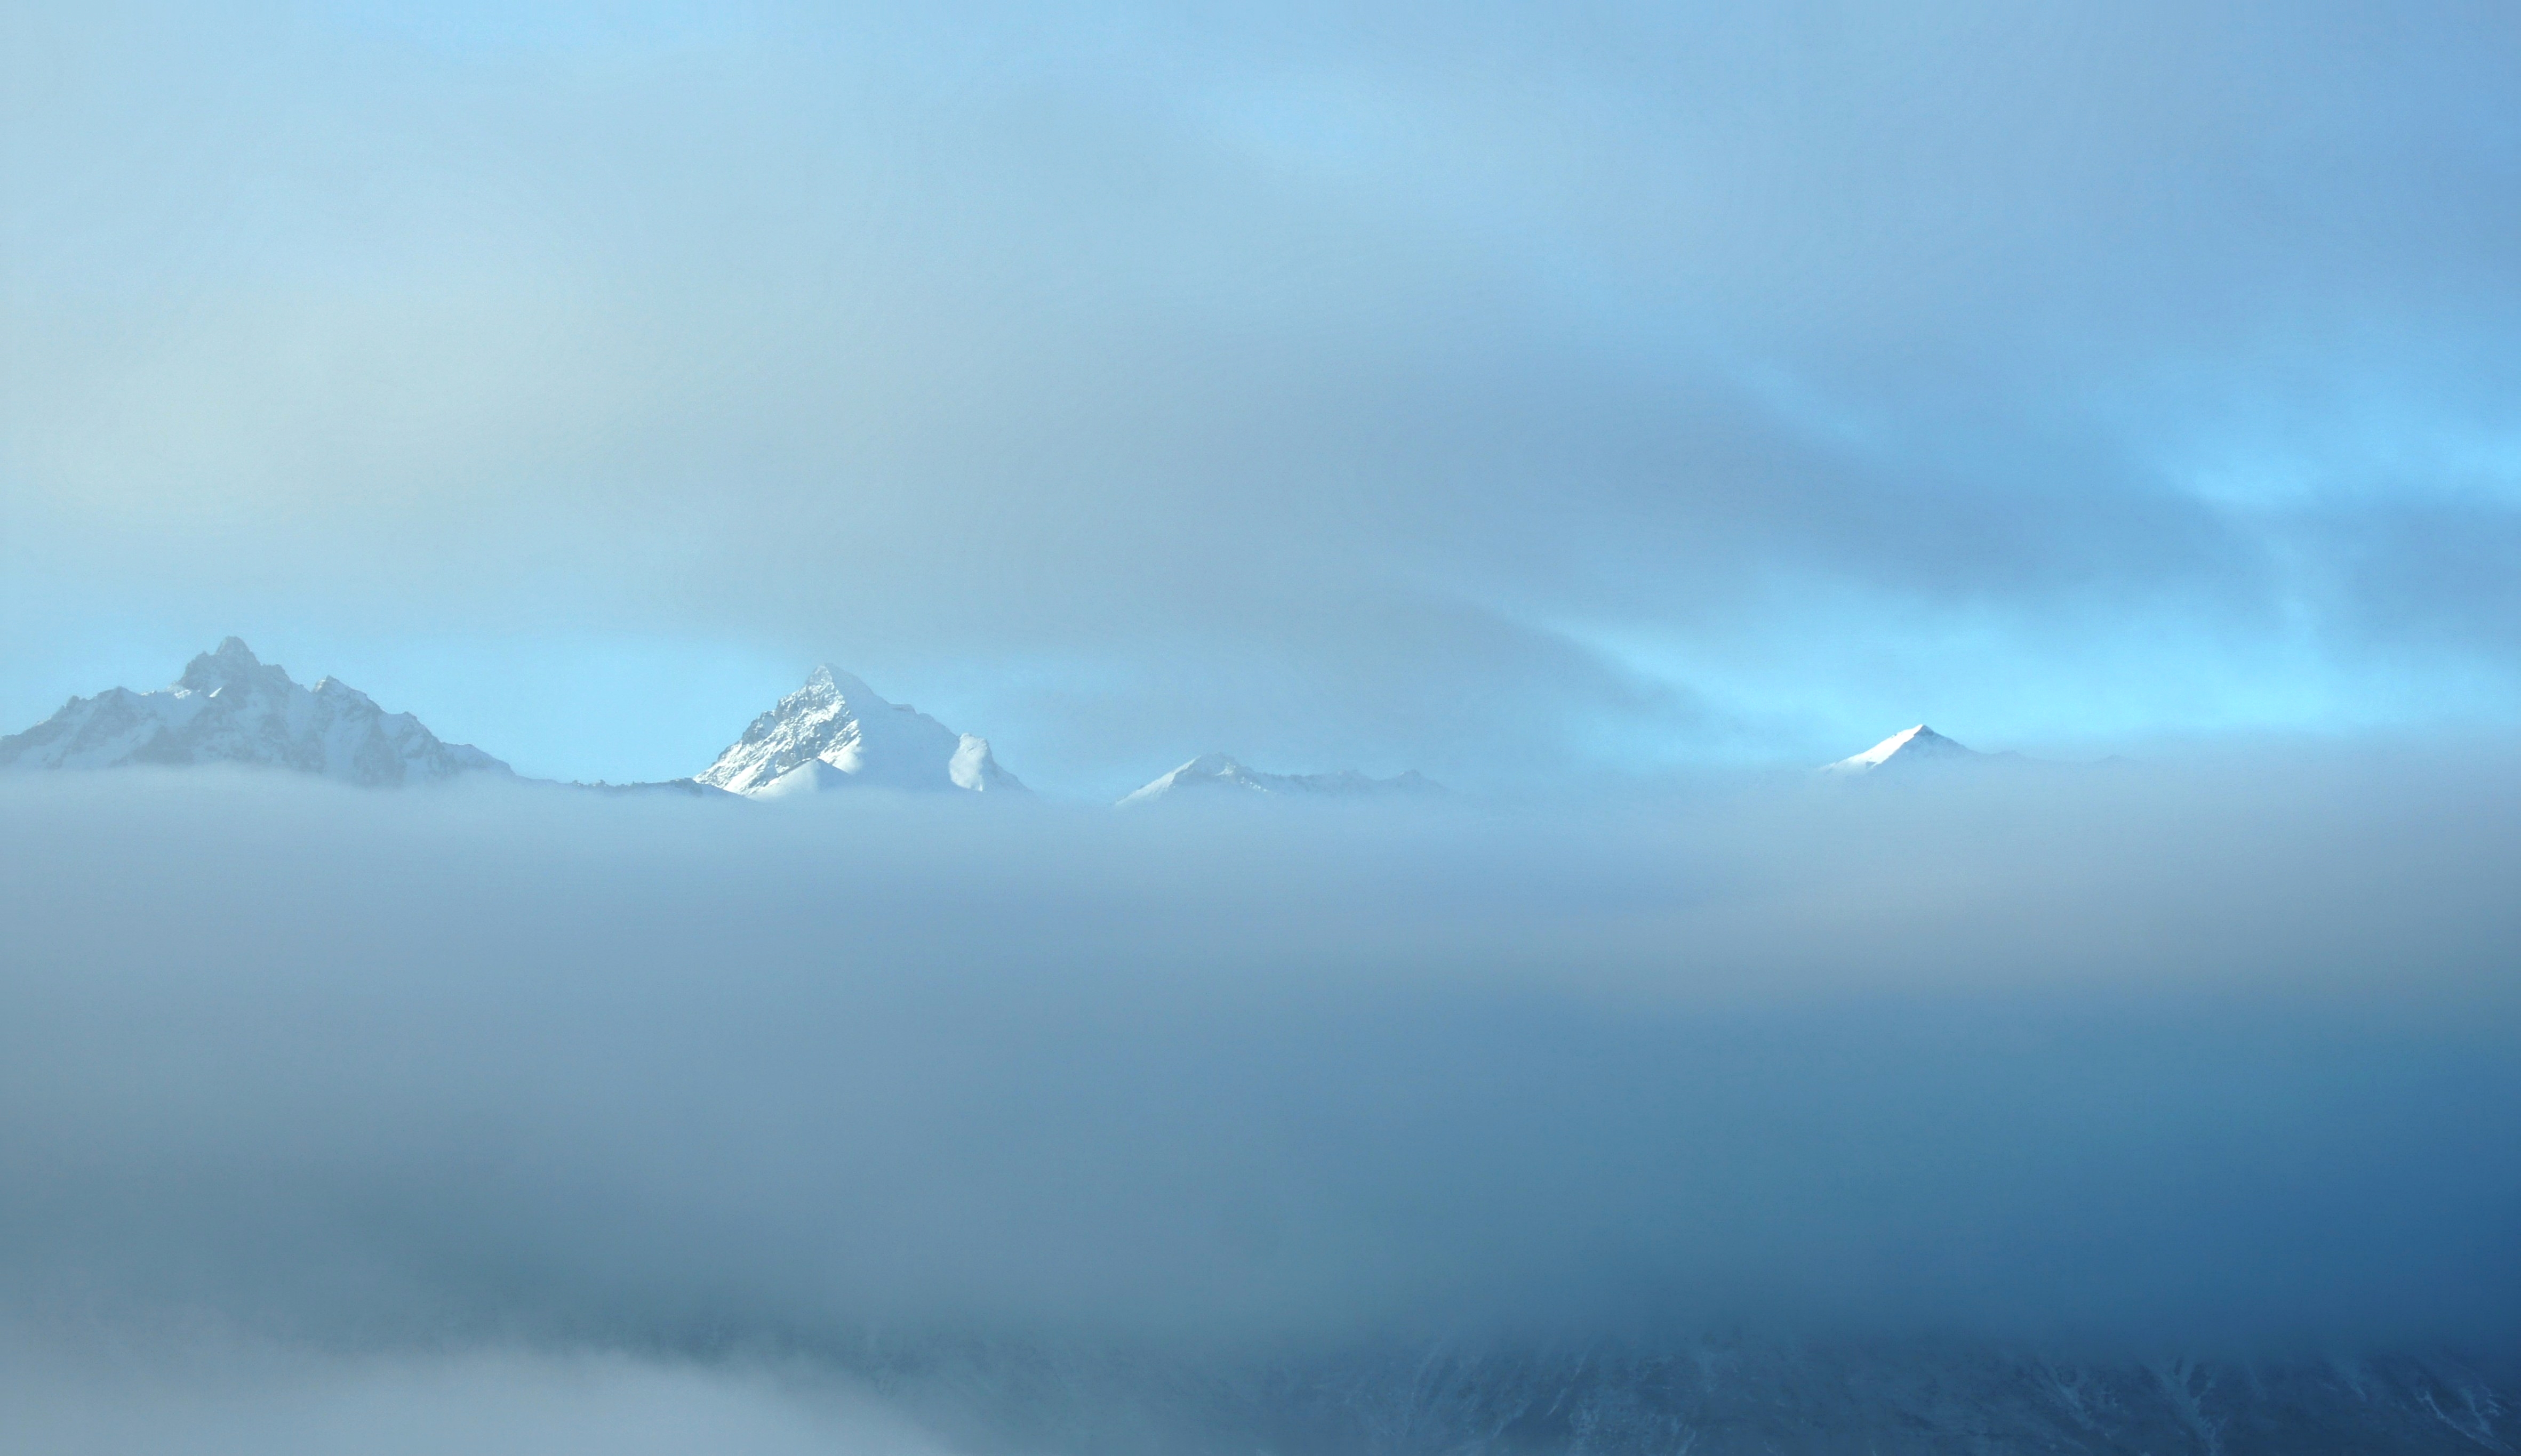 Fog on the Mountains - Alaska by JLS Photography